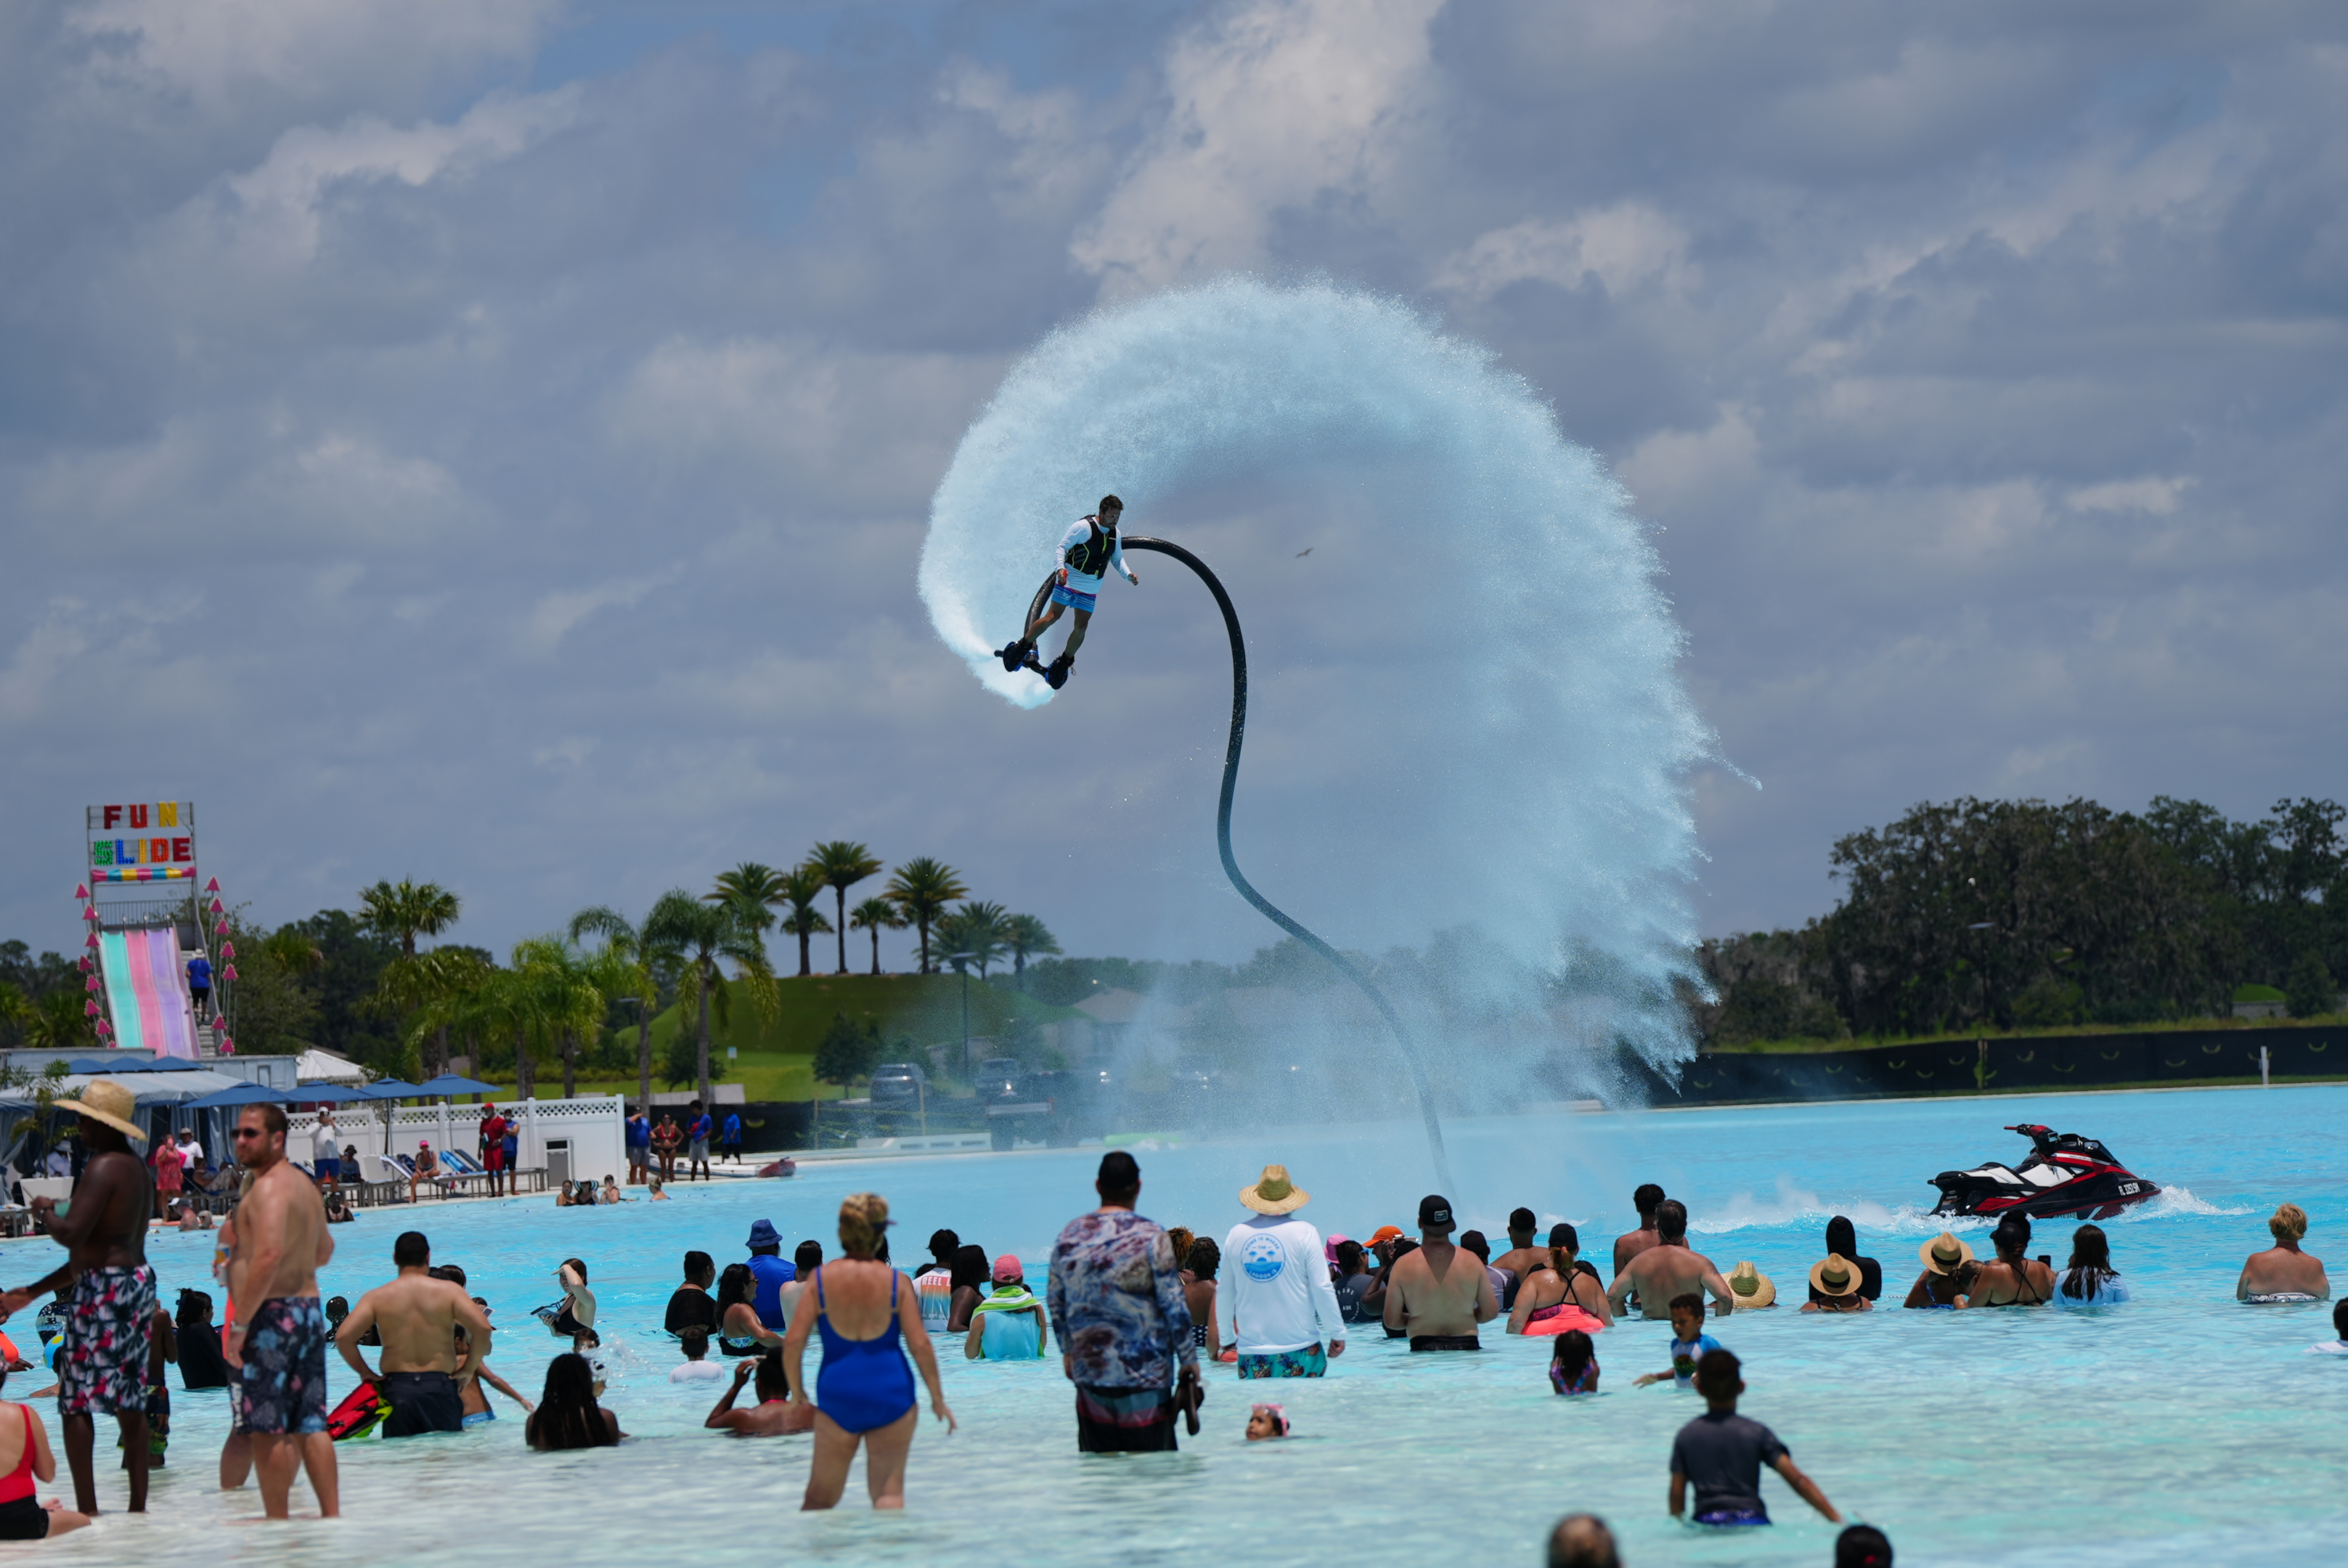 The water jet pack show rises high above the crowds in the Lagoon